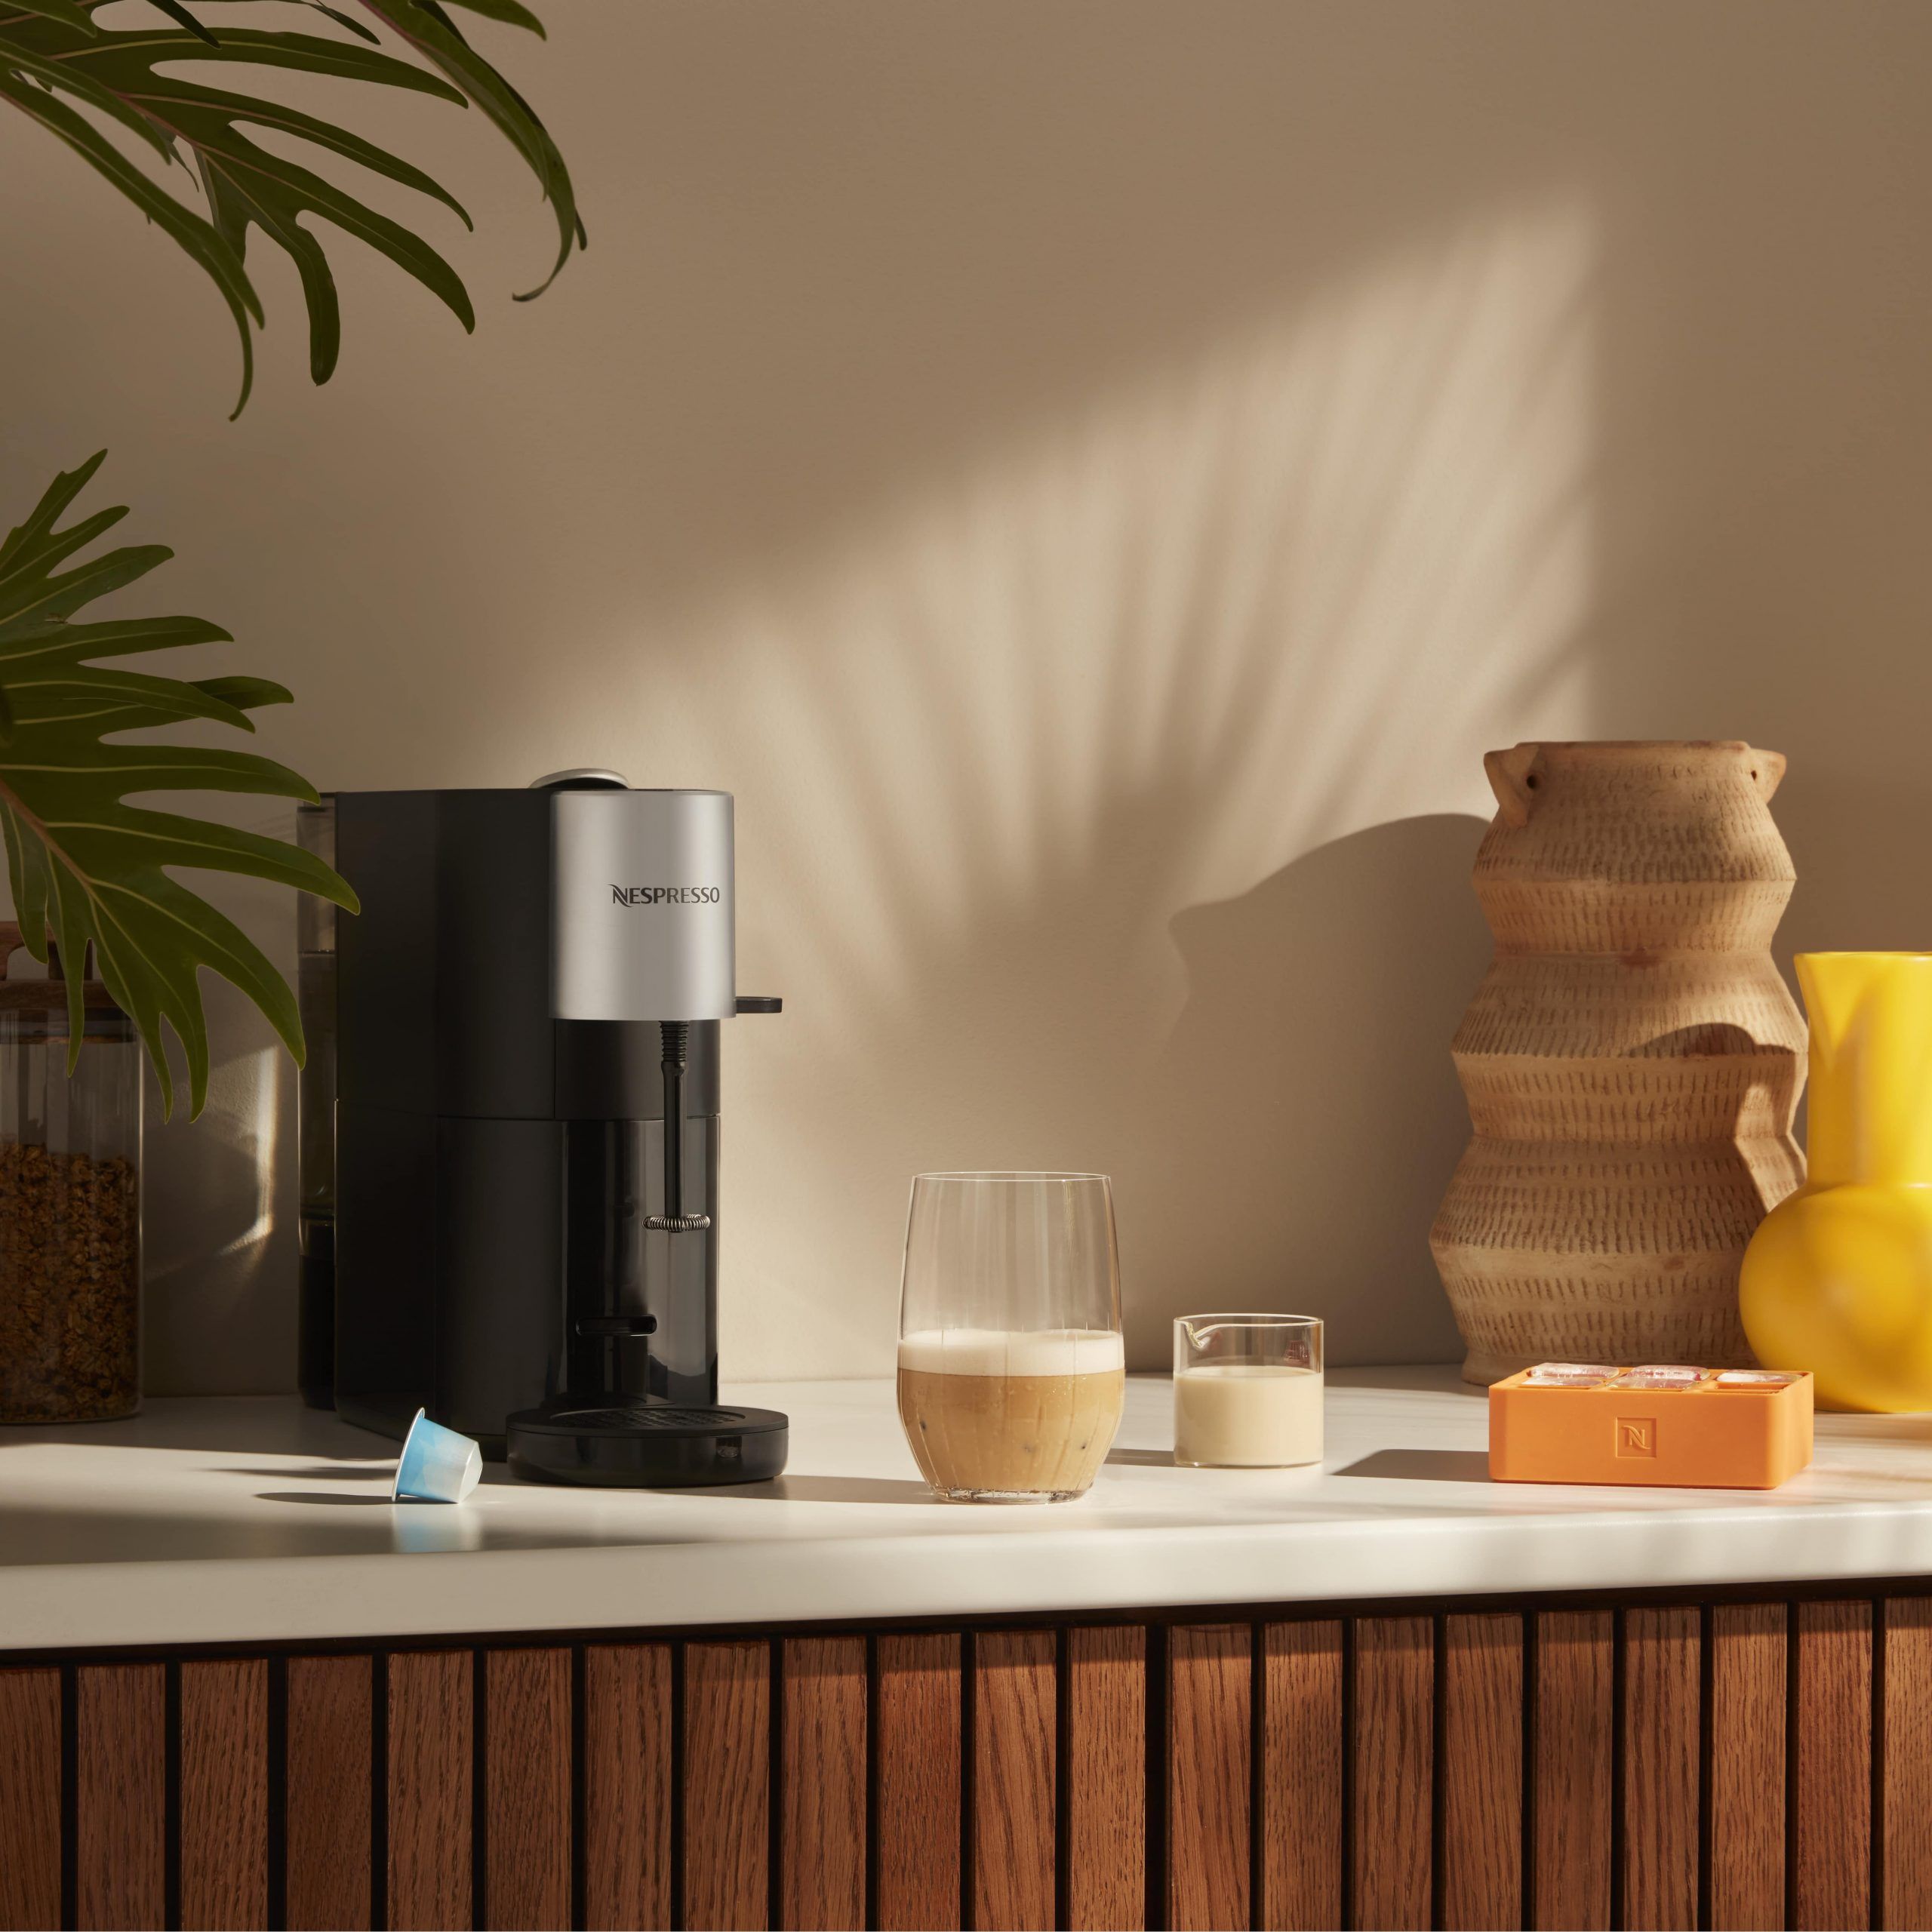 Nespresso - Expertly crafted for ice, our Barista Creations crew